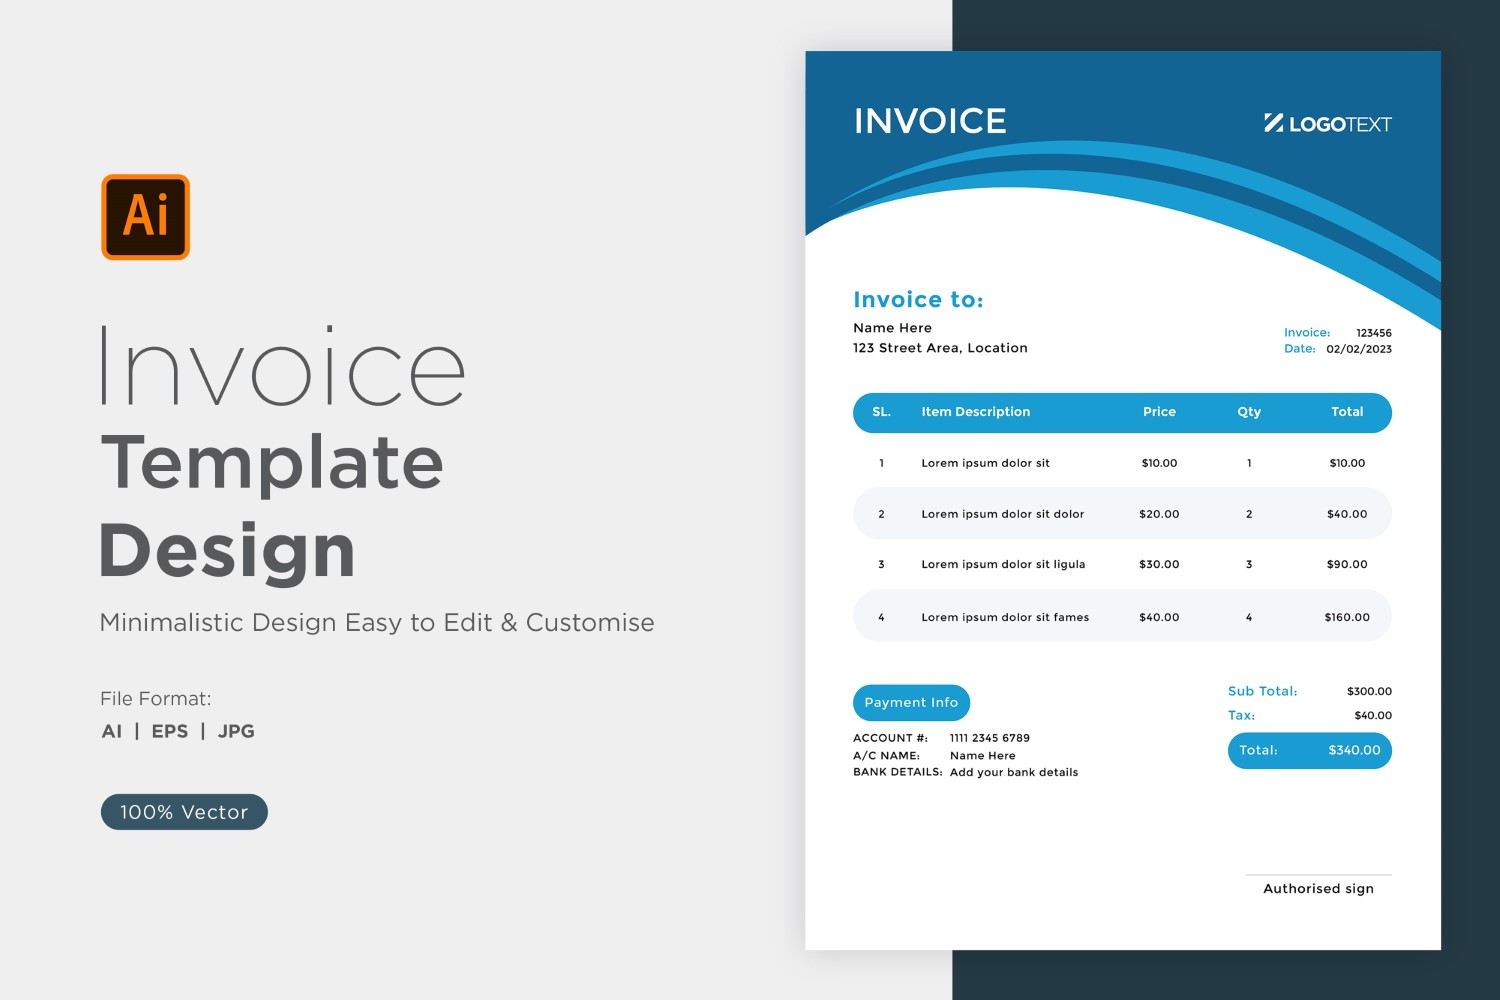 Corporate Invoice Design Template Bill form Business Payments Details Design Template 96